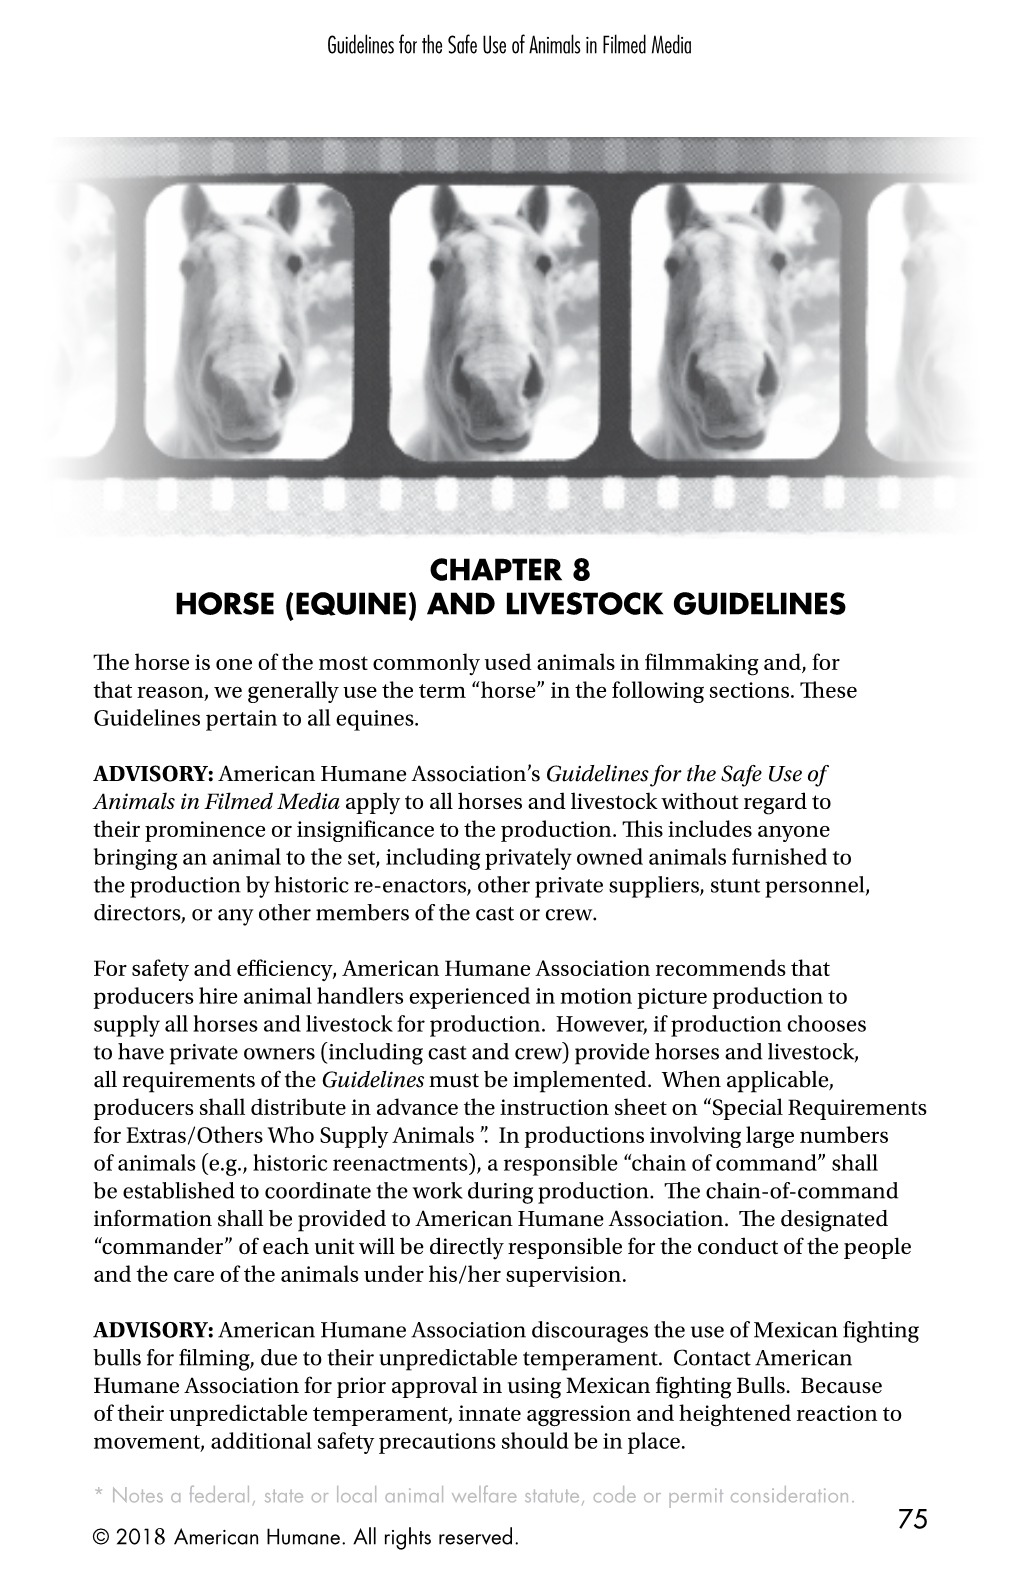 Chapter 8 Horse (Equine) and Livestock Guidelines